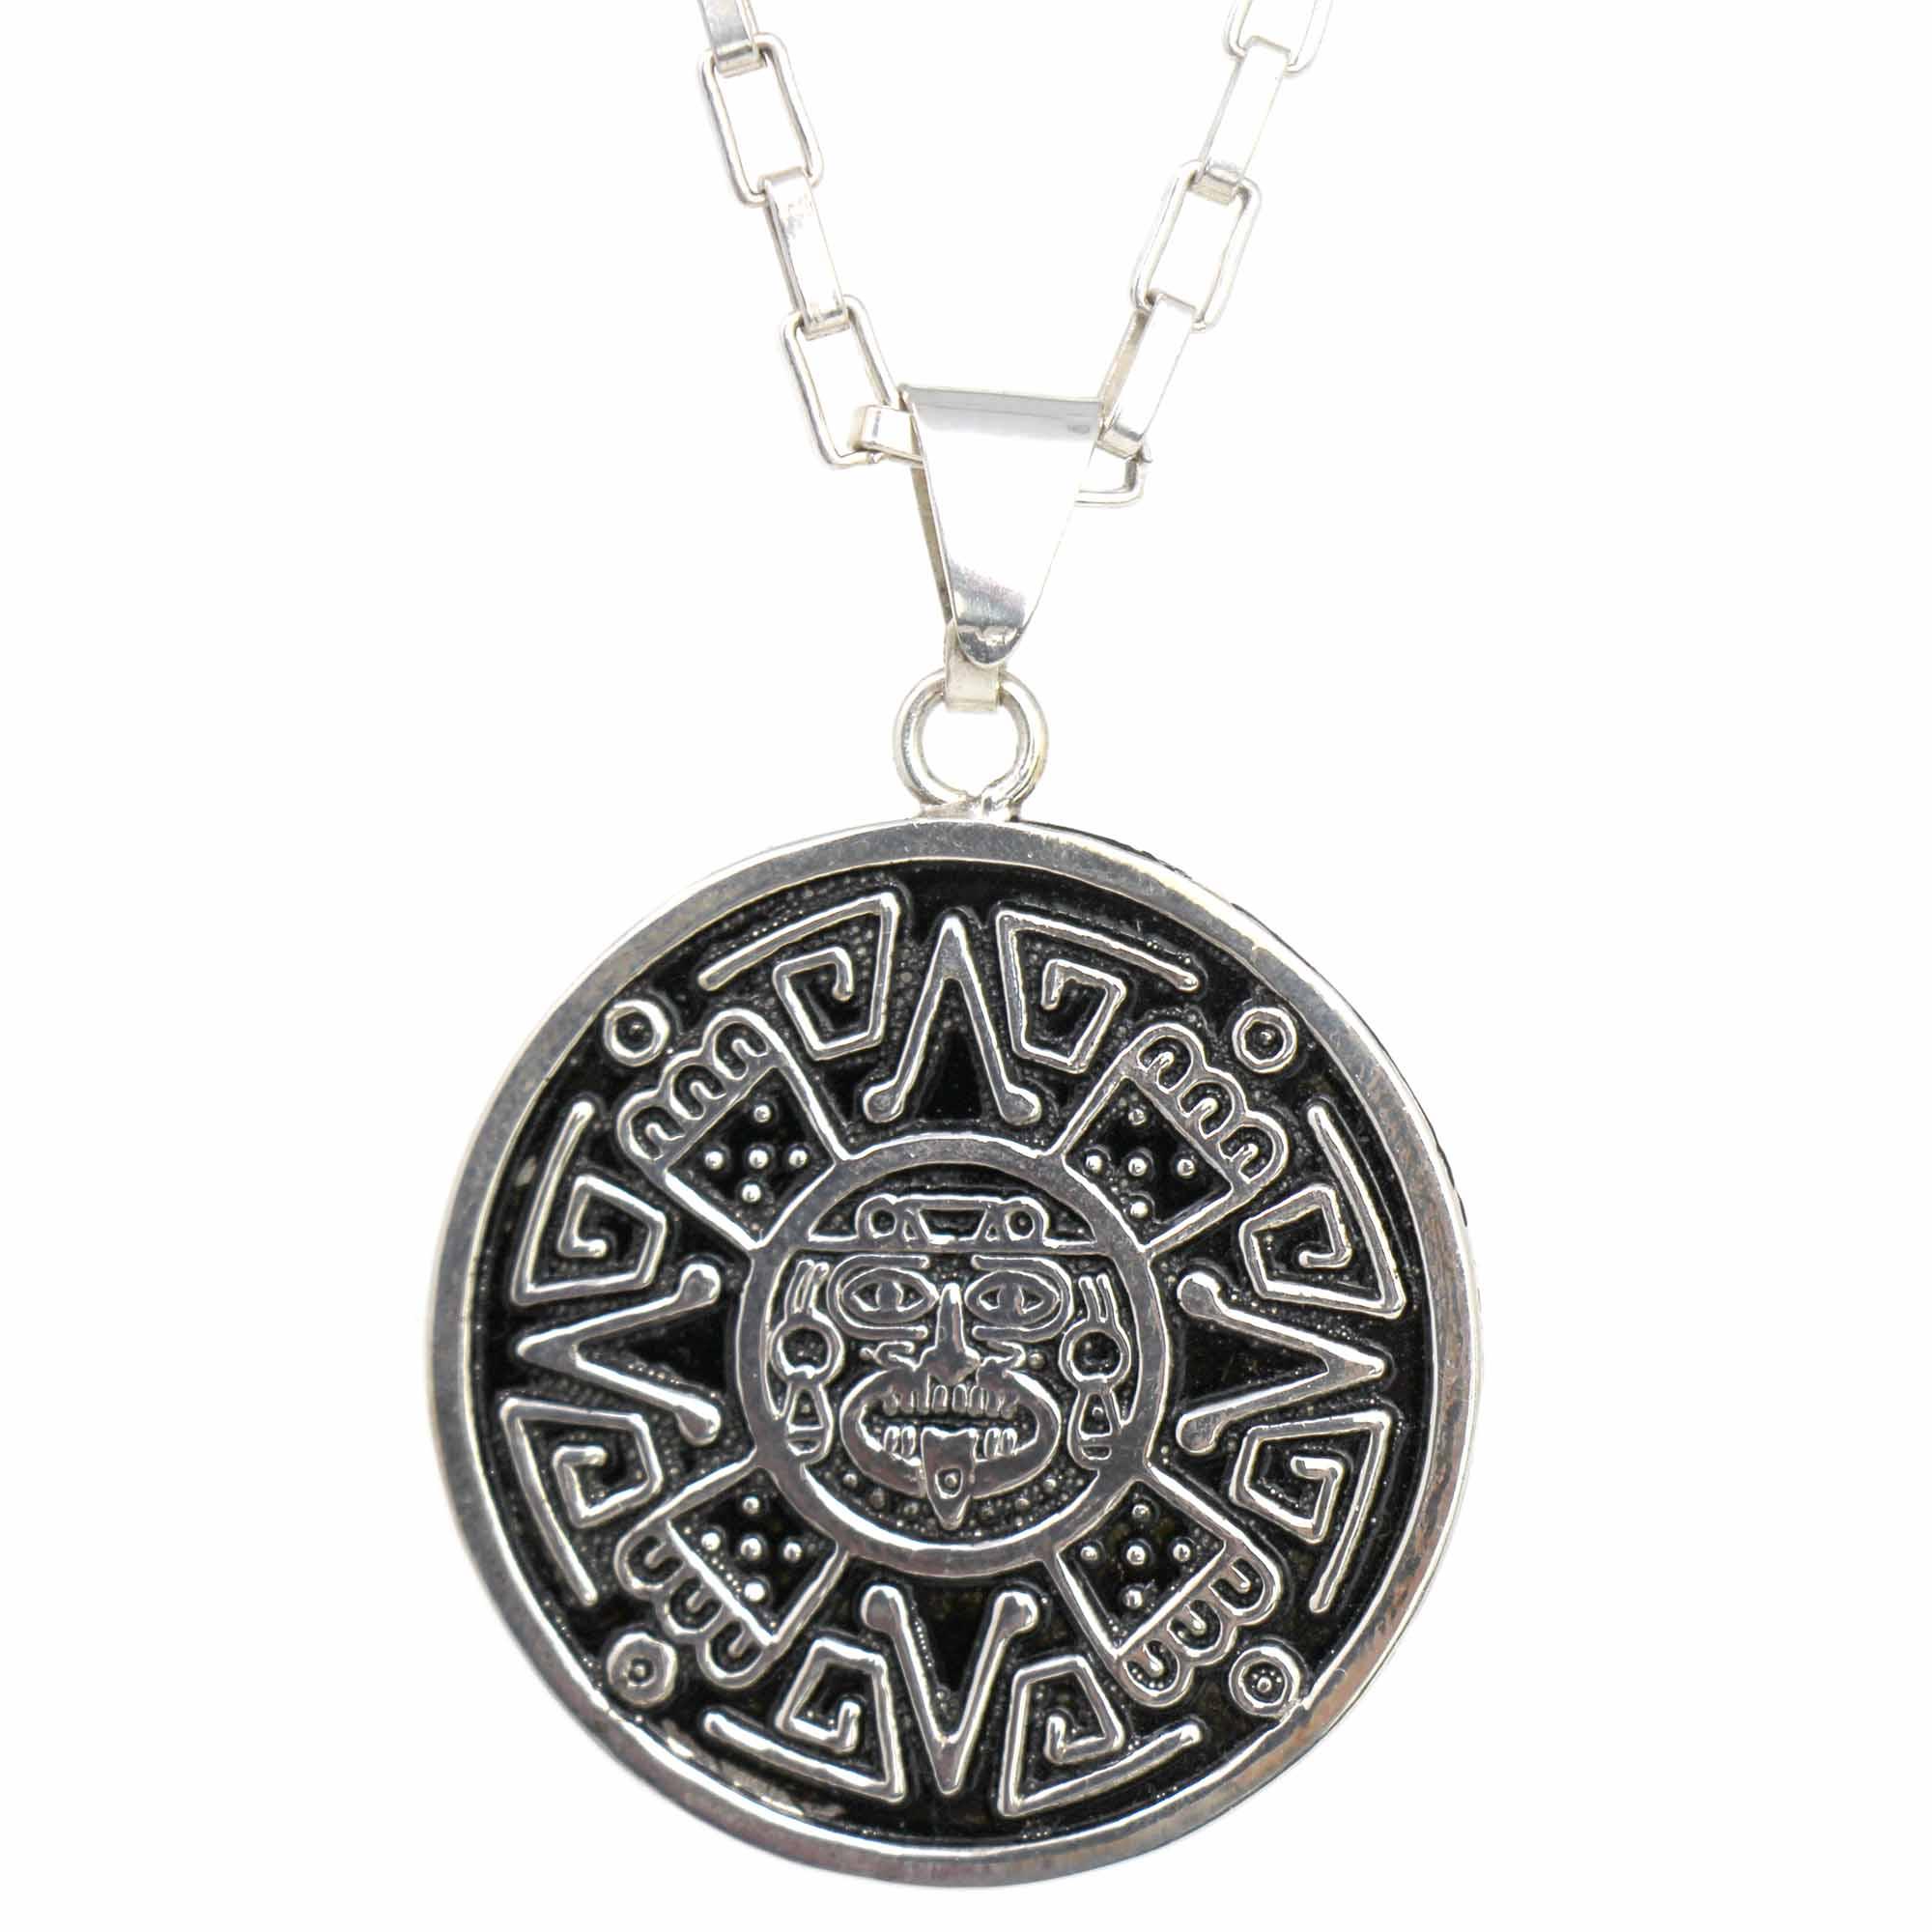 Alpaca Silver Aztec Face Pendant with Chain - Flyclothing LLC